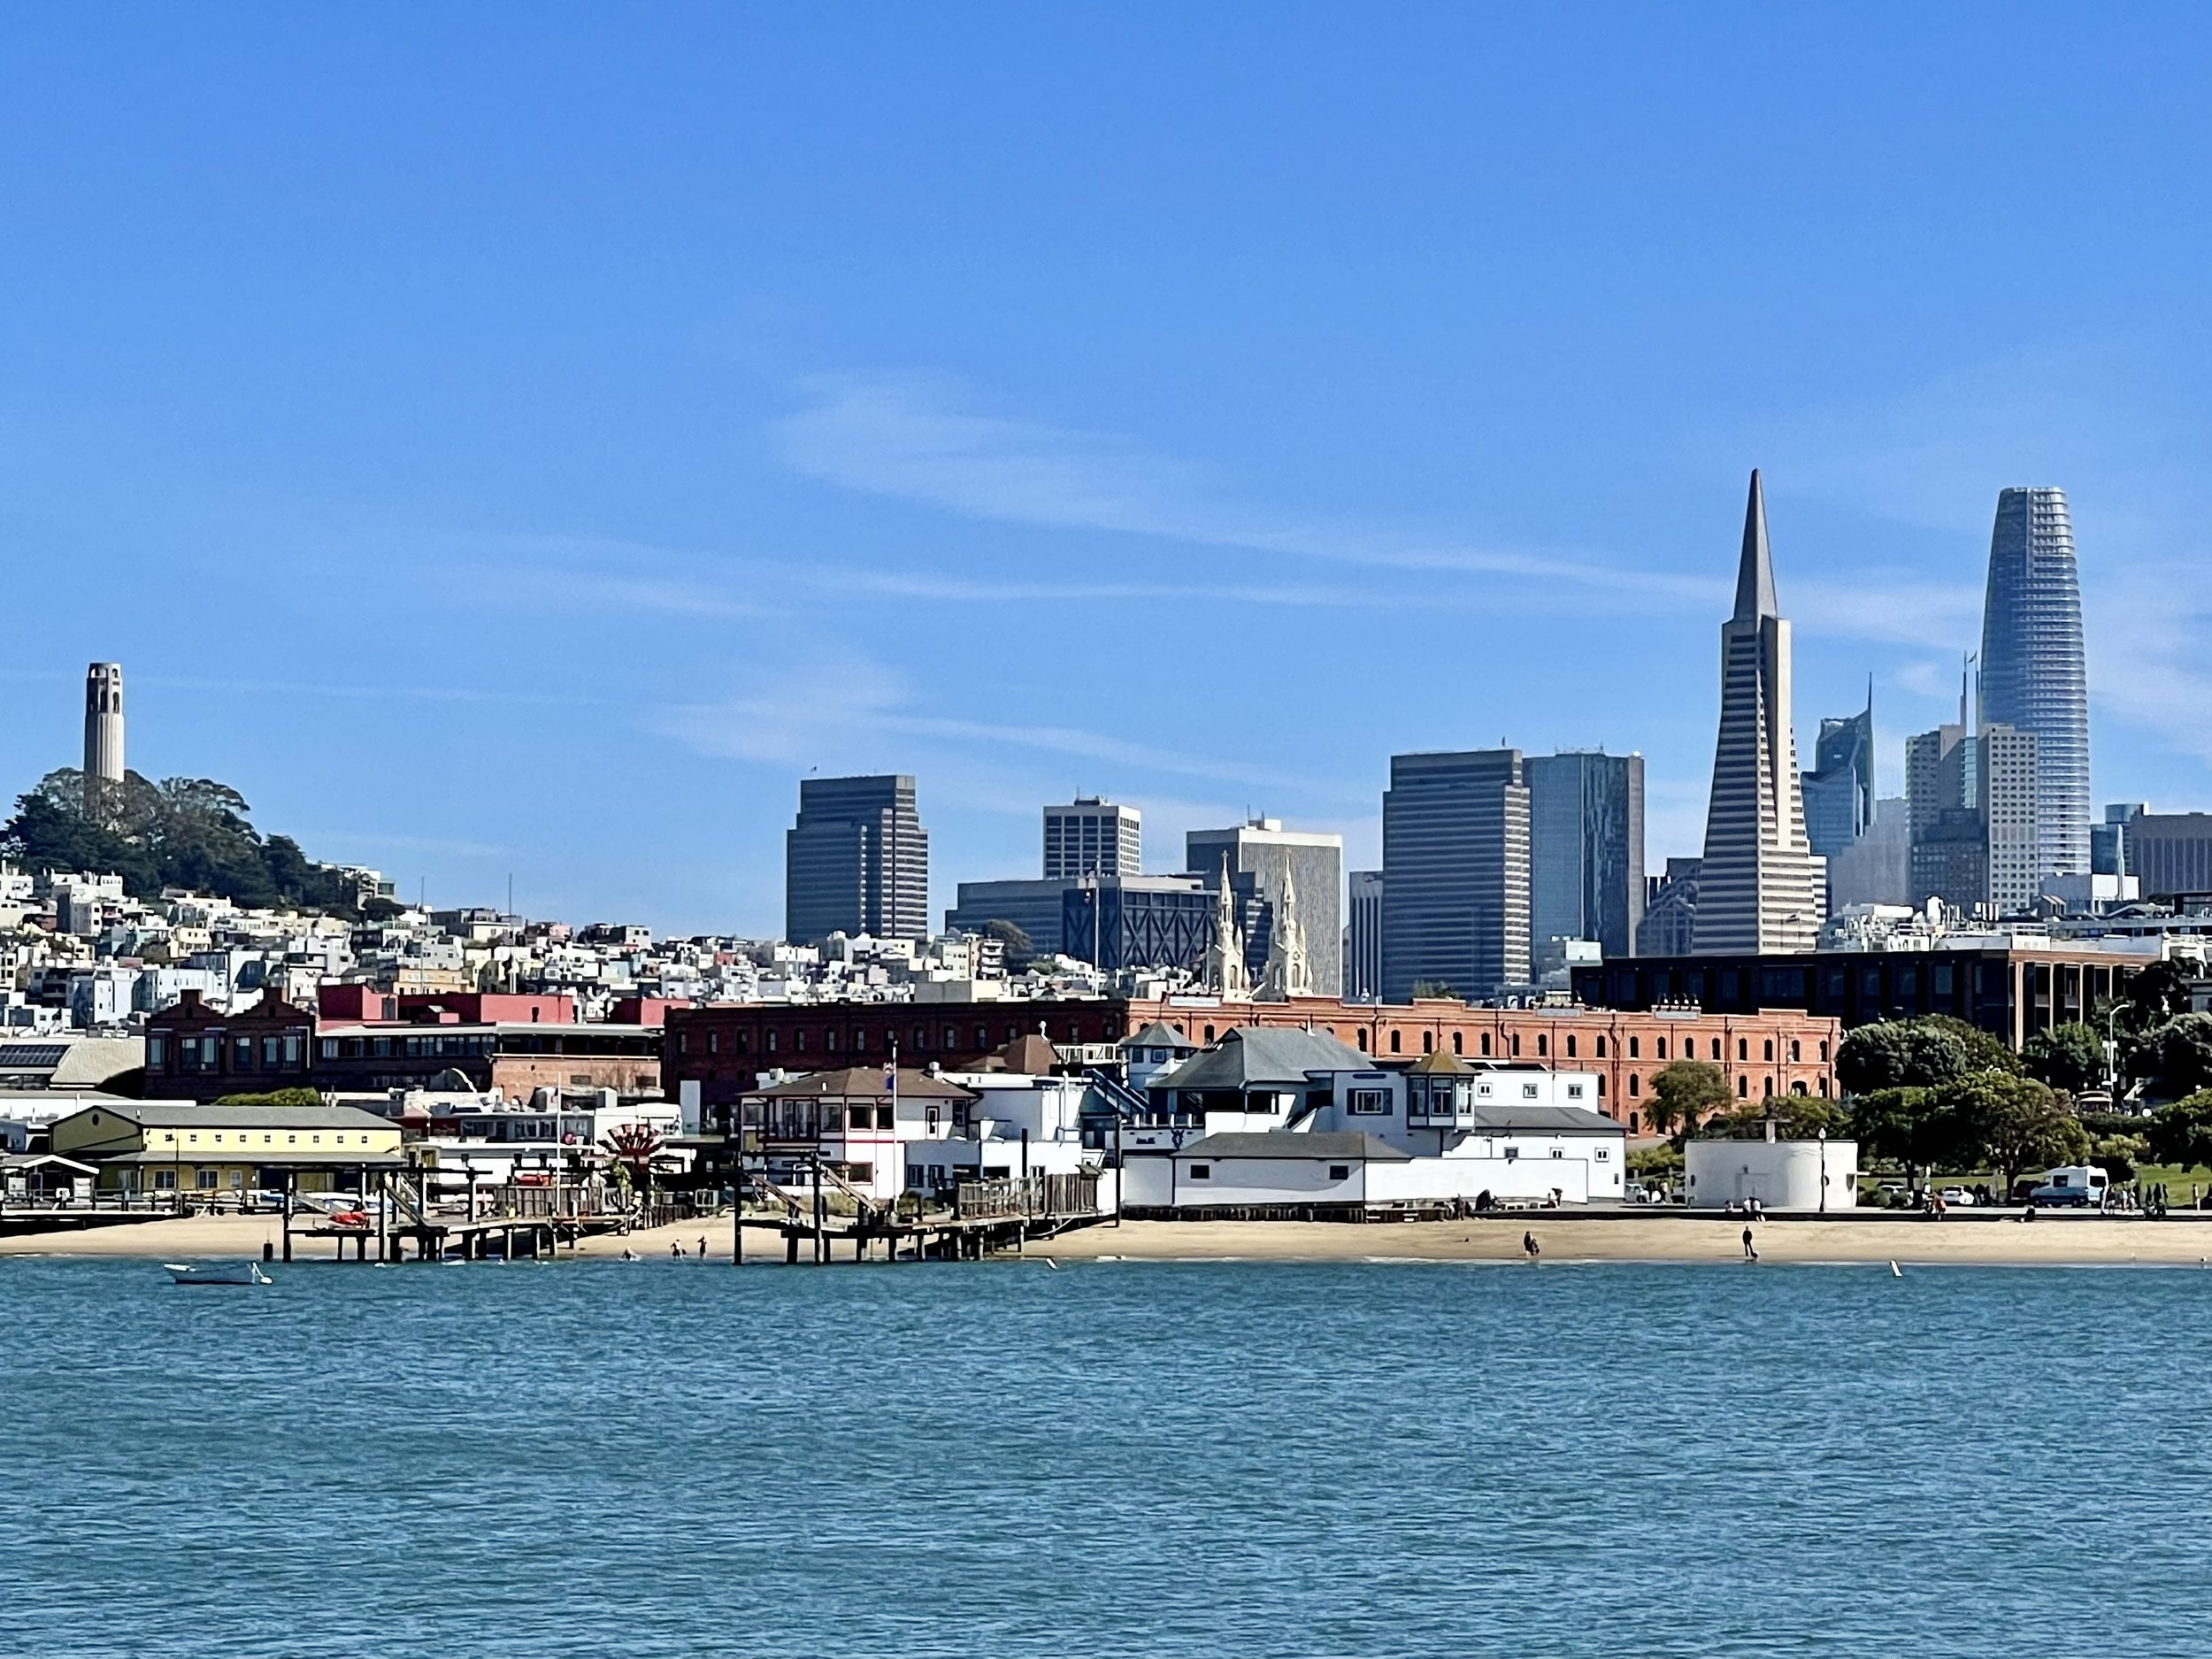 One of the best views in San Francisco is from the Municipal Pier at the Aquatic Cove.